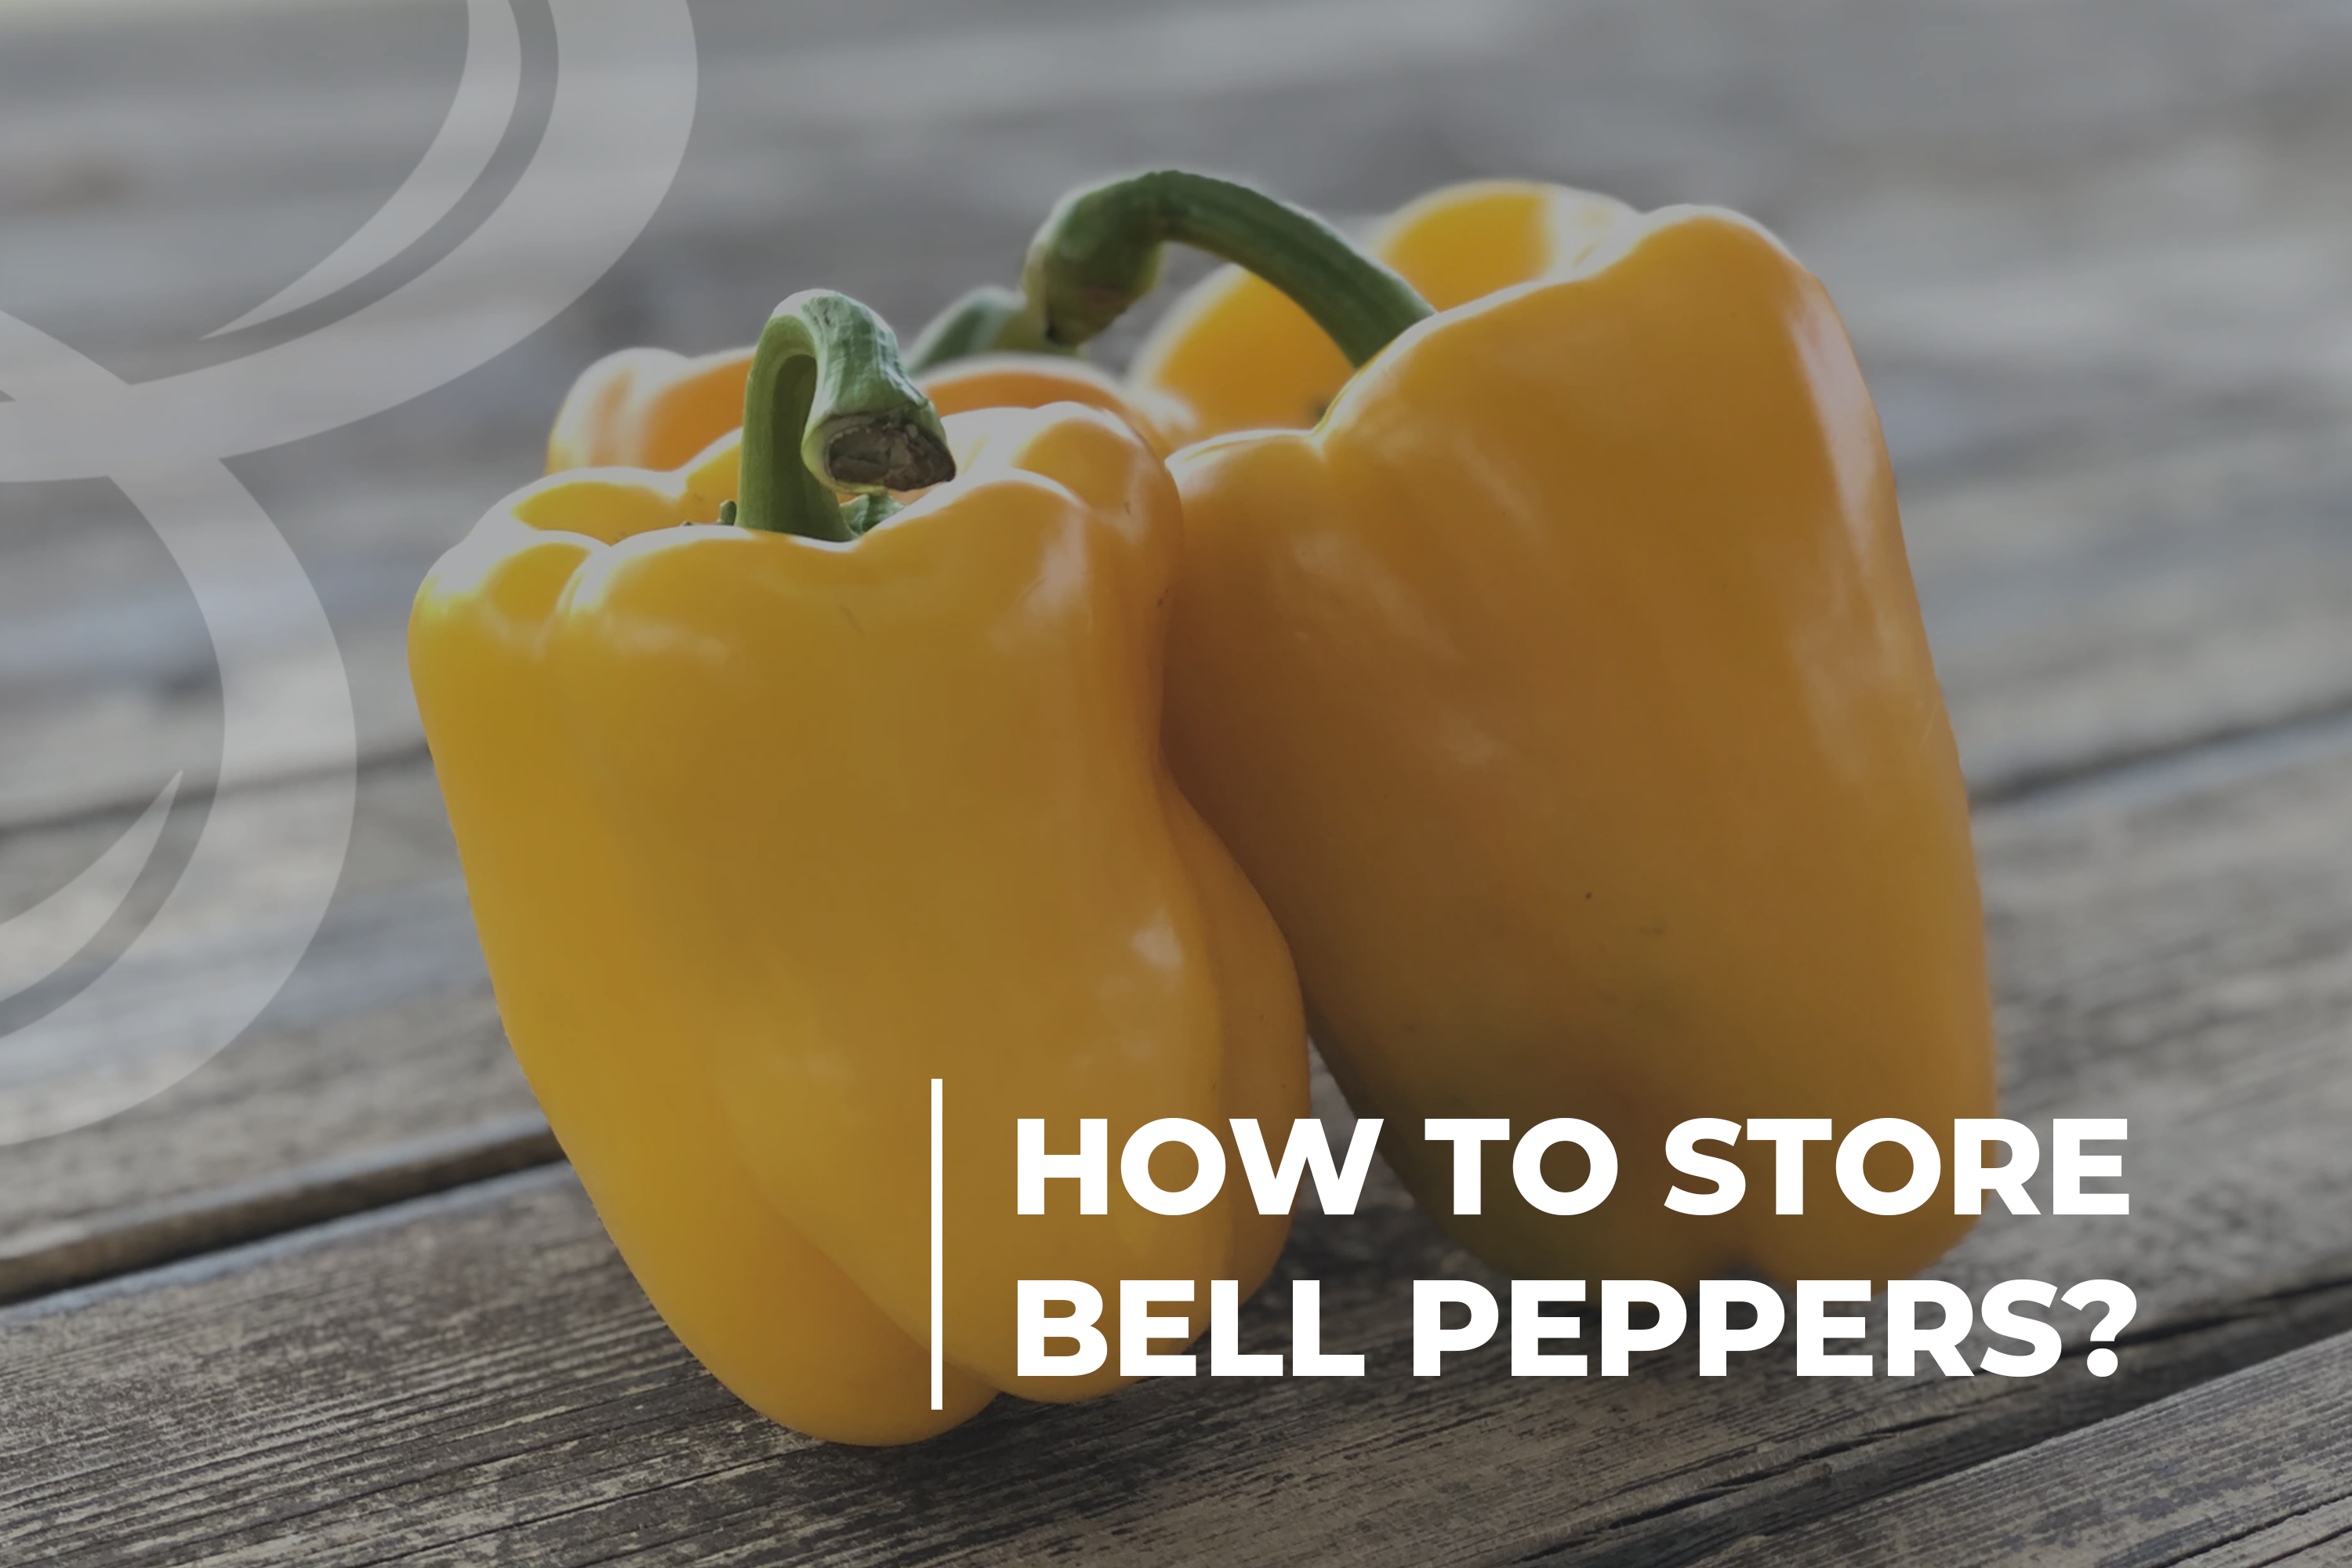 How to store bell peppers